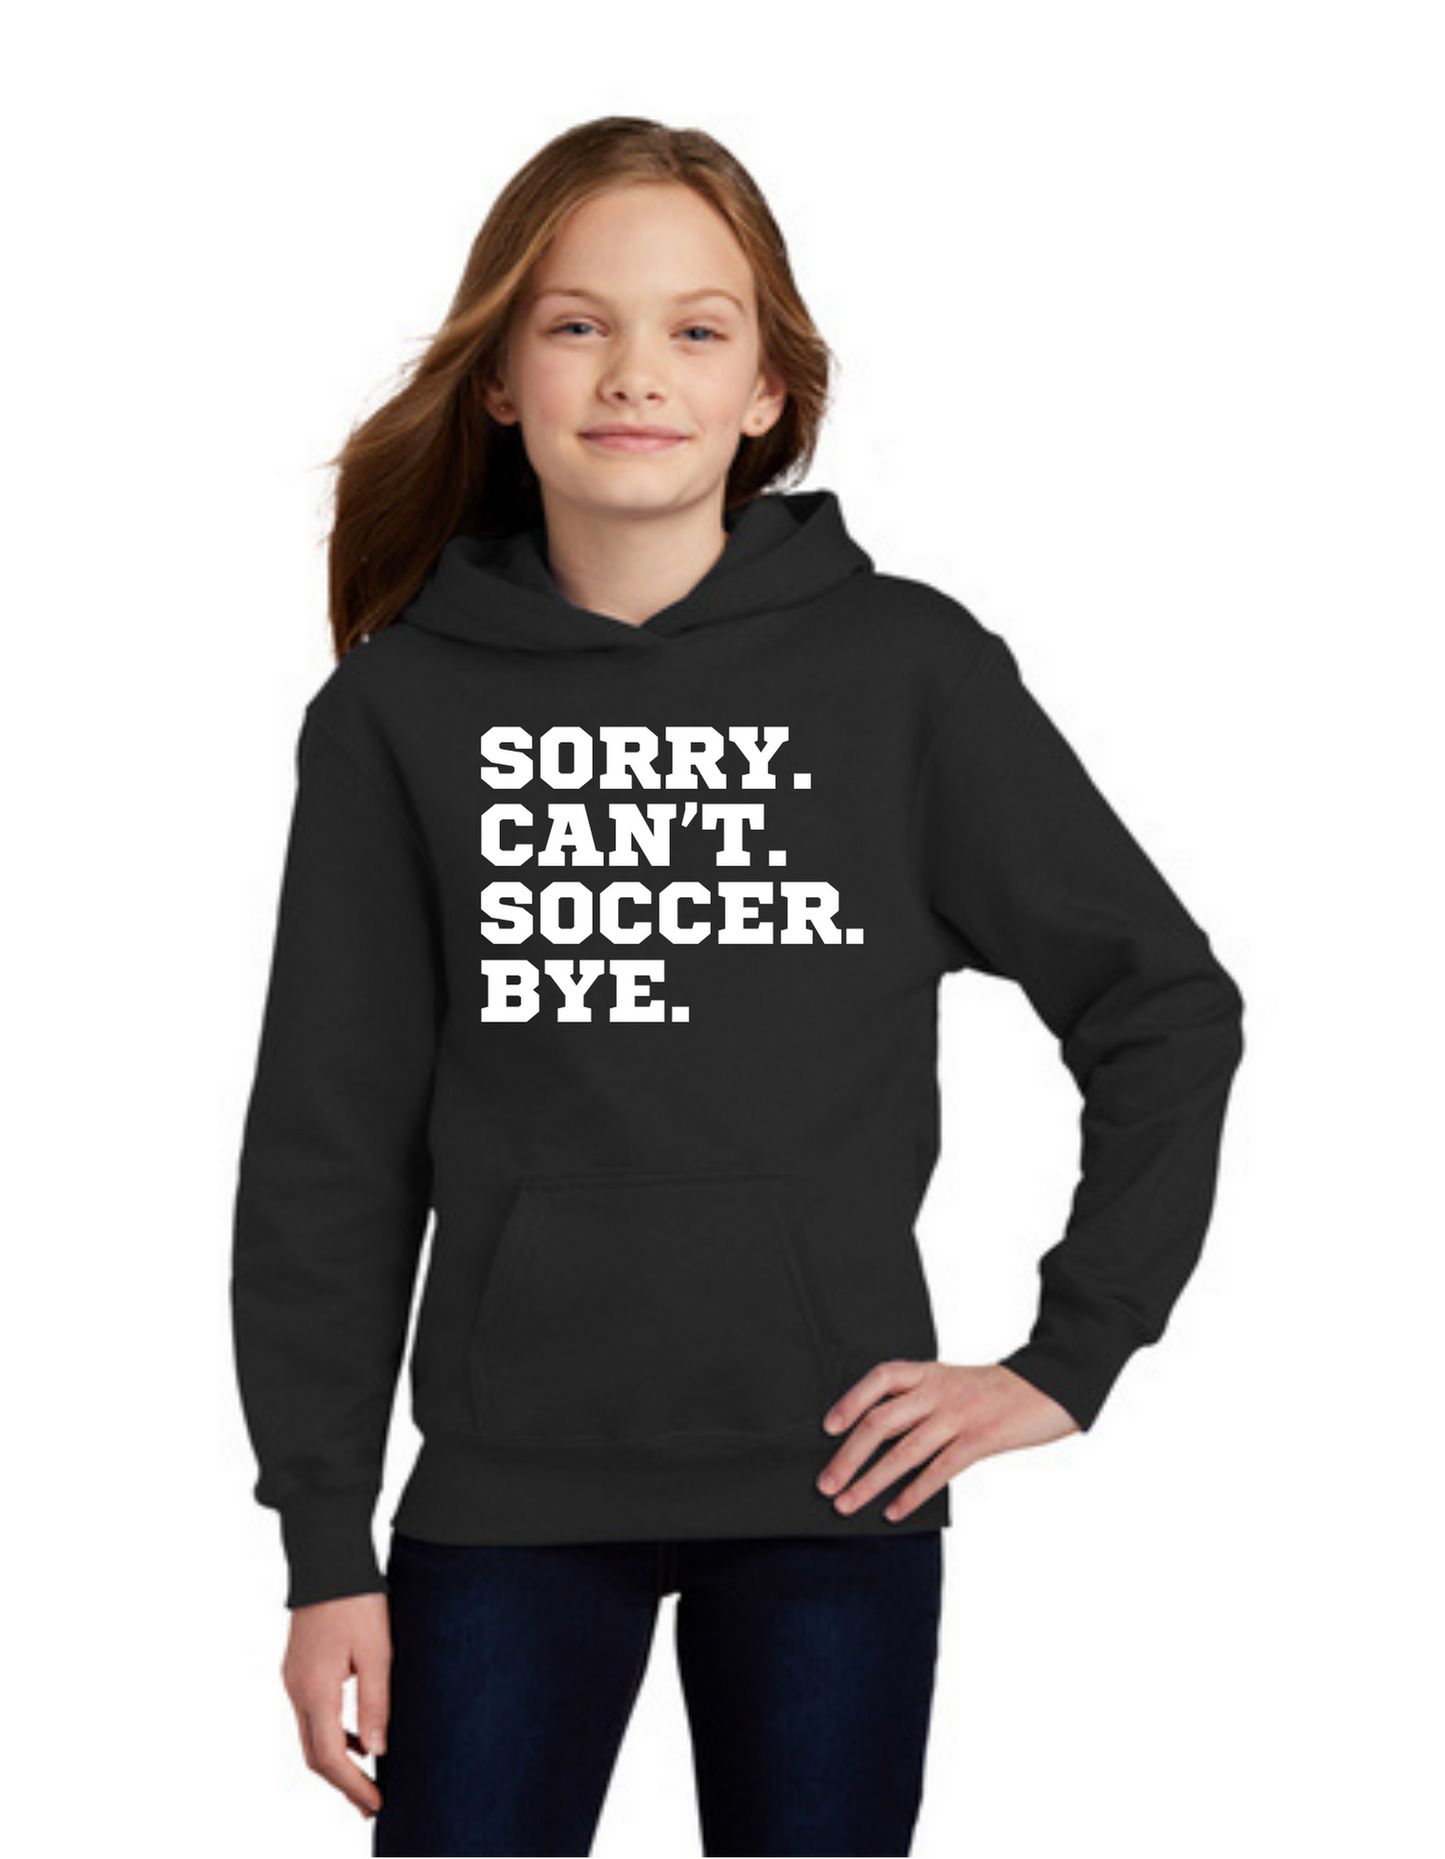 Sideline Youth Hoodie - Sorry. Can't. Soccer. Bye.